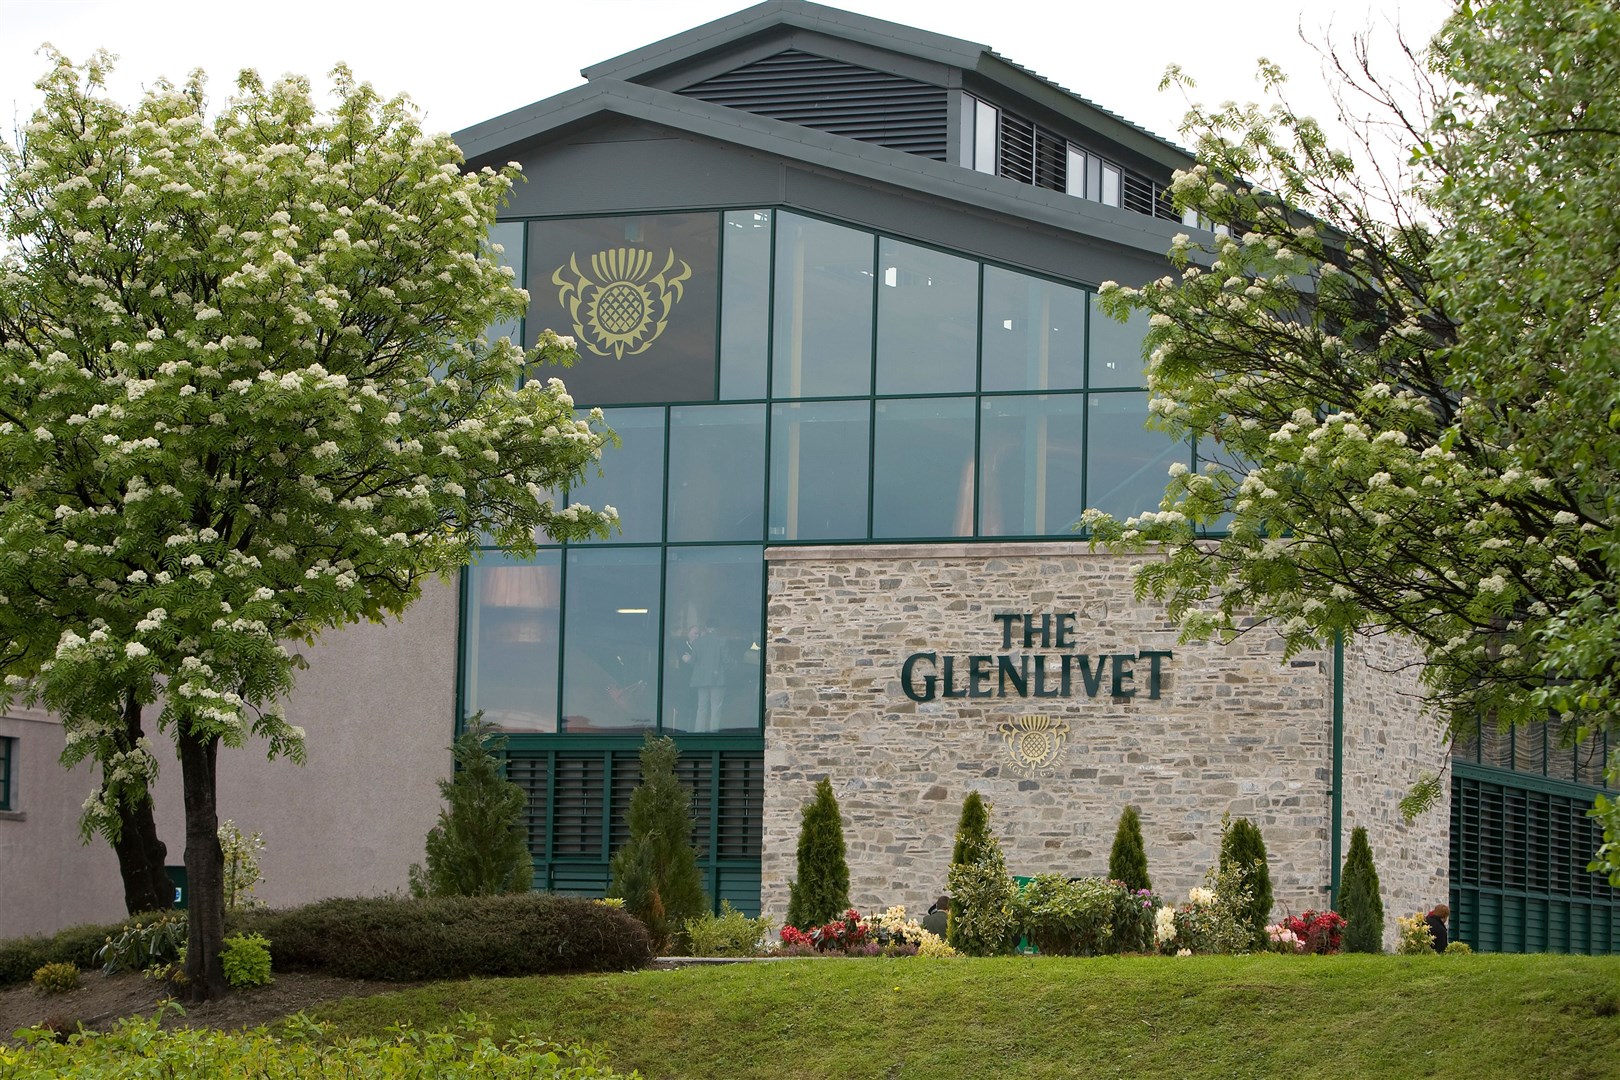 The Glenlivet is one of the famous brands owned by Chivas Brothers.